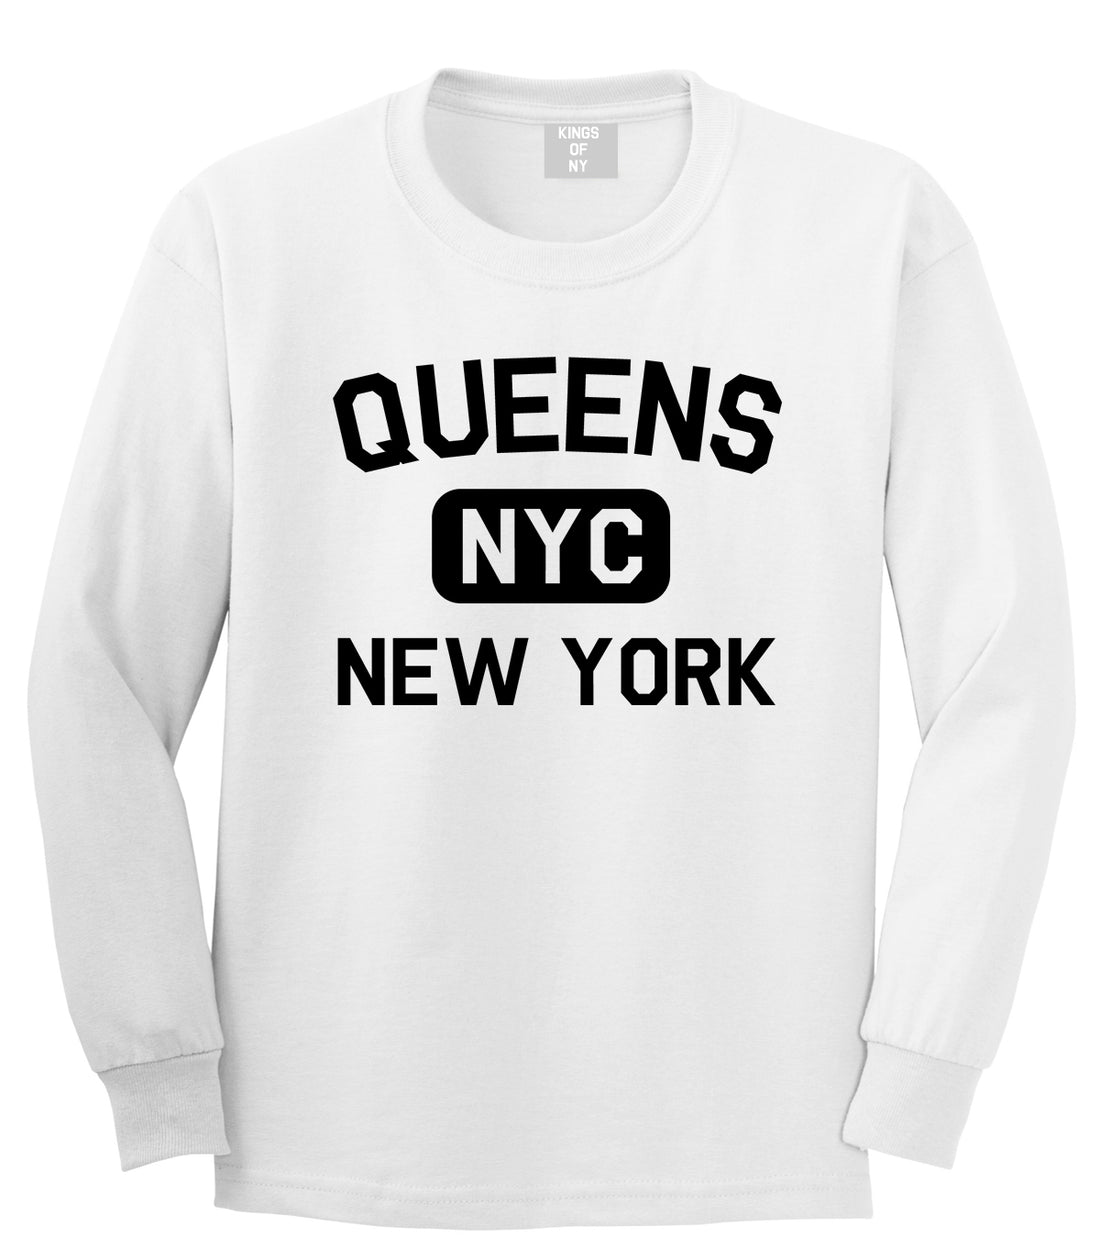 Queens Gym NYC New York Mens Long Sleeve T-Shirt White